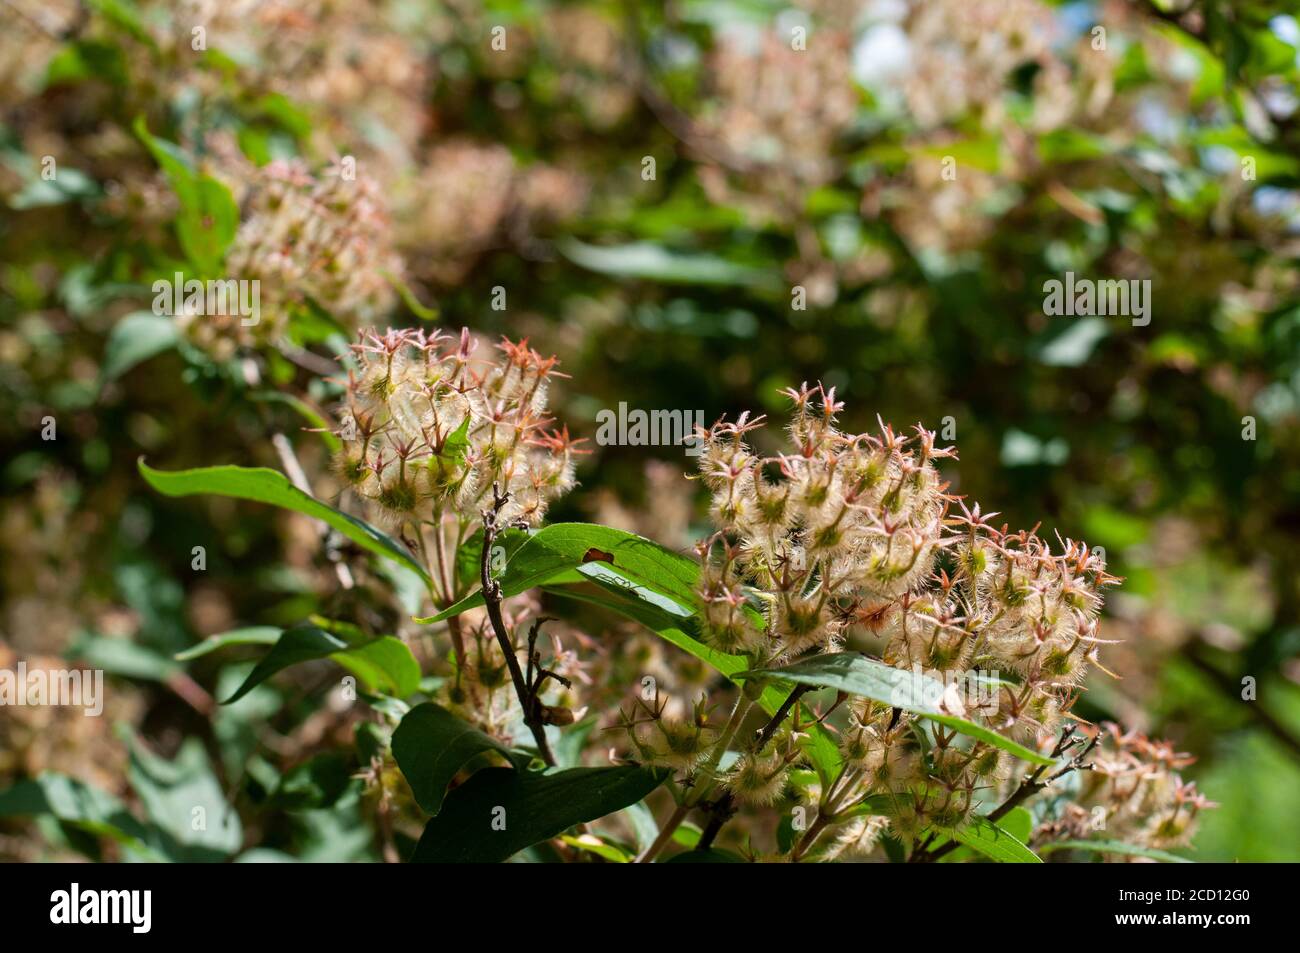 hairy seeds at a twig of a wilted weigela shrub in a garden Stock Photo